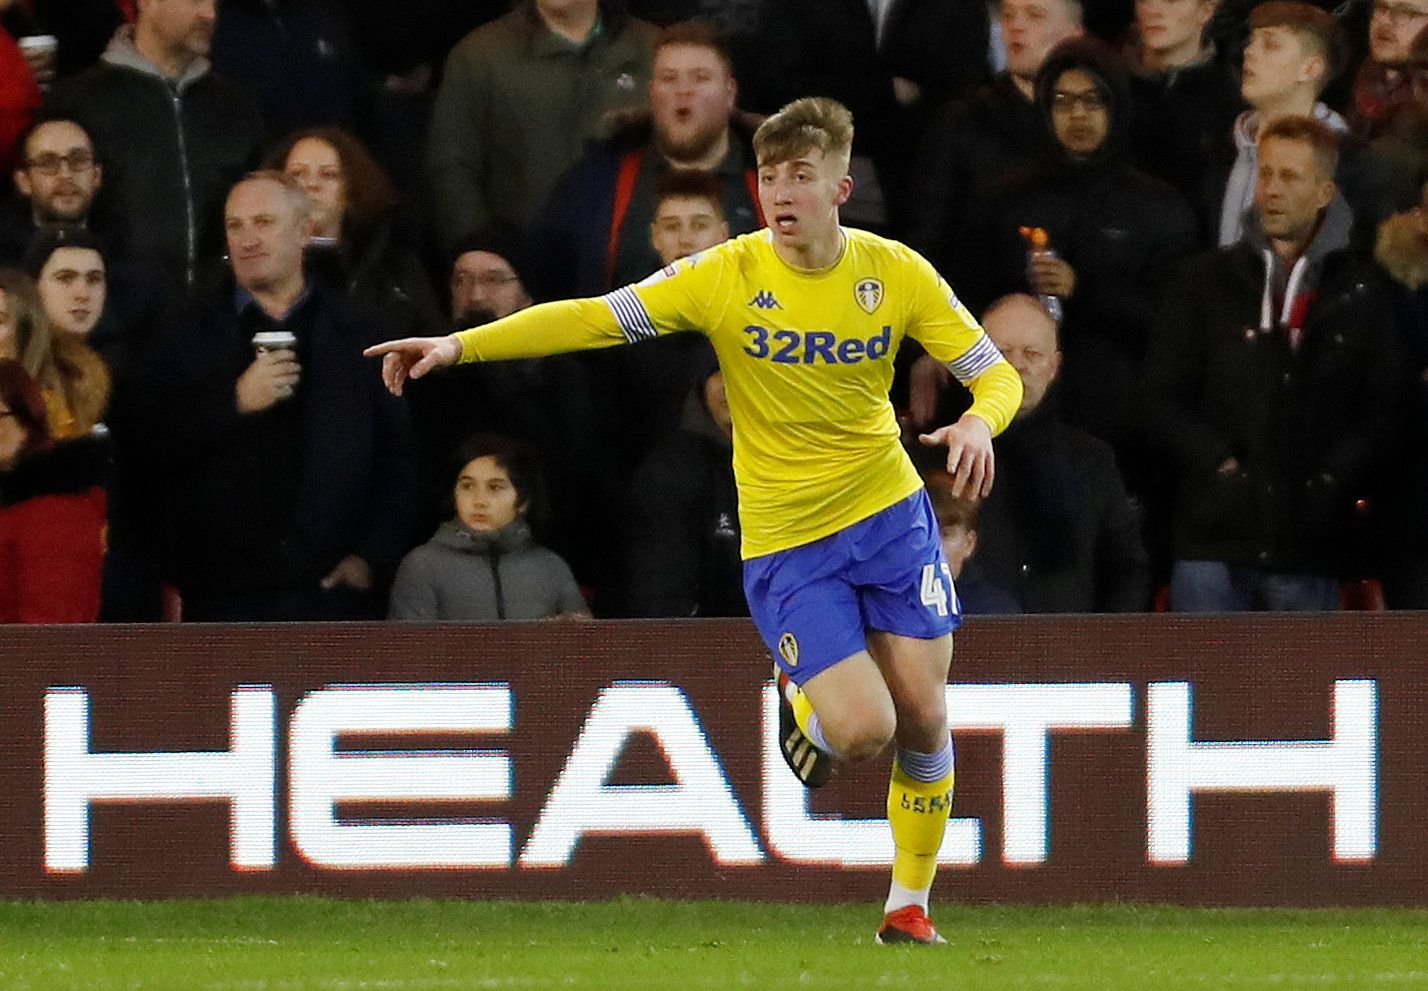 Soccer Football - Championship - Nottingham Forest v Leeds United - The City Ground, Nottingham, Britain - January 1, 2019   Leeds' Jack Clarke celebrates after he scores the first goal   Action Images/Paul Childs    EDITORIAL USE ONLY. No use with unauthorized audio, video, data, fixture lists, club/league logos or 